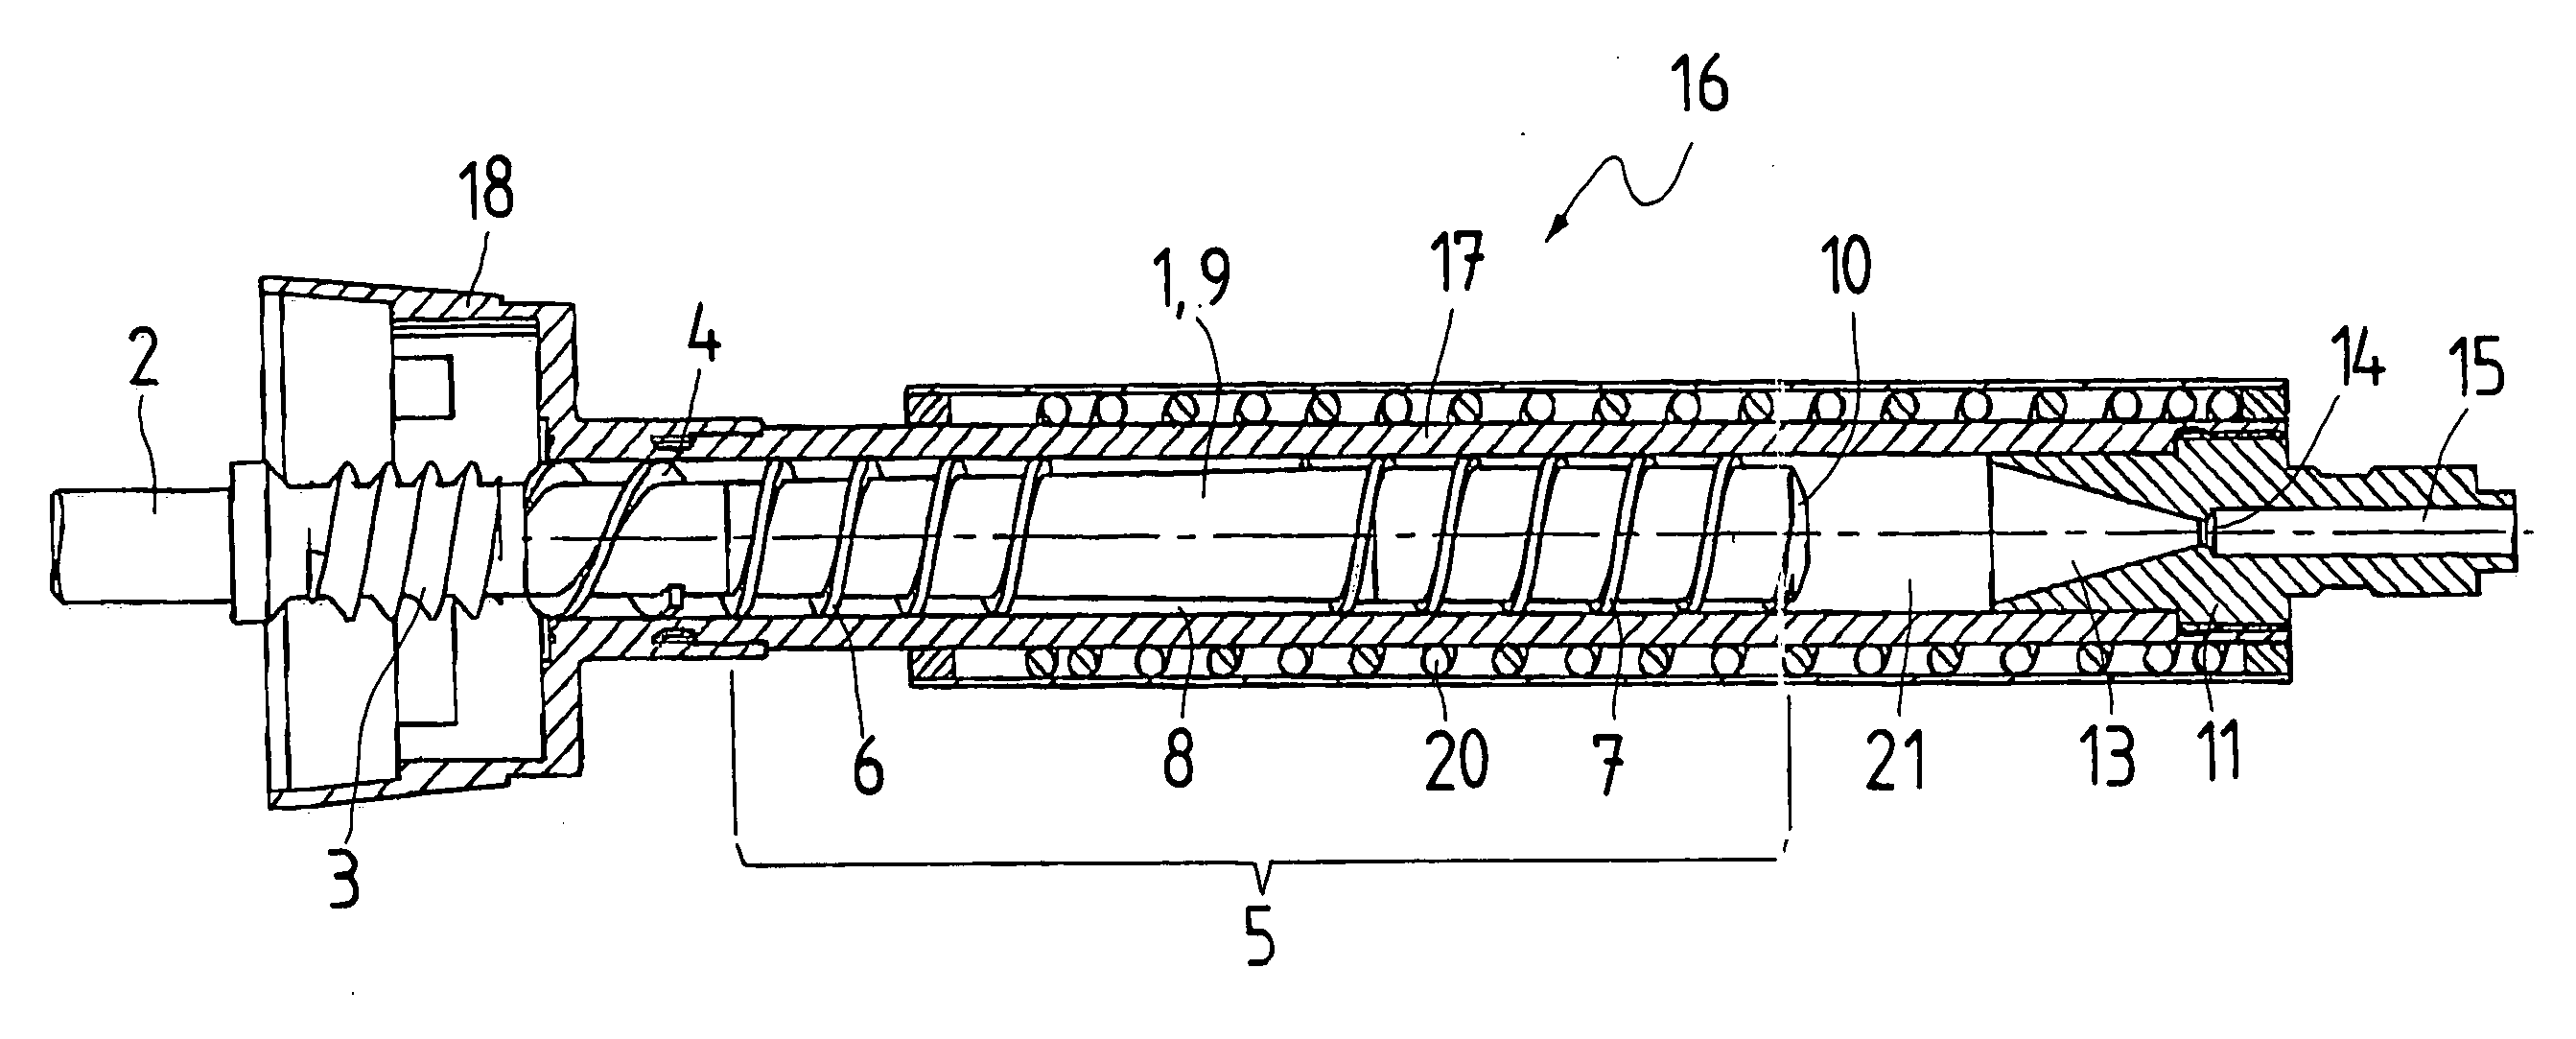 Extruder, specifically an extrusion welding device